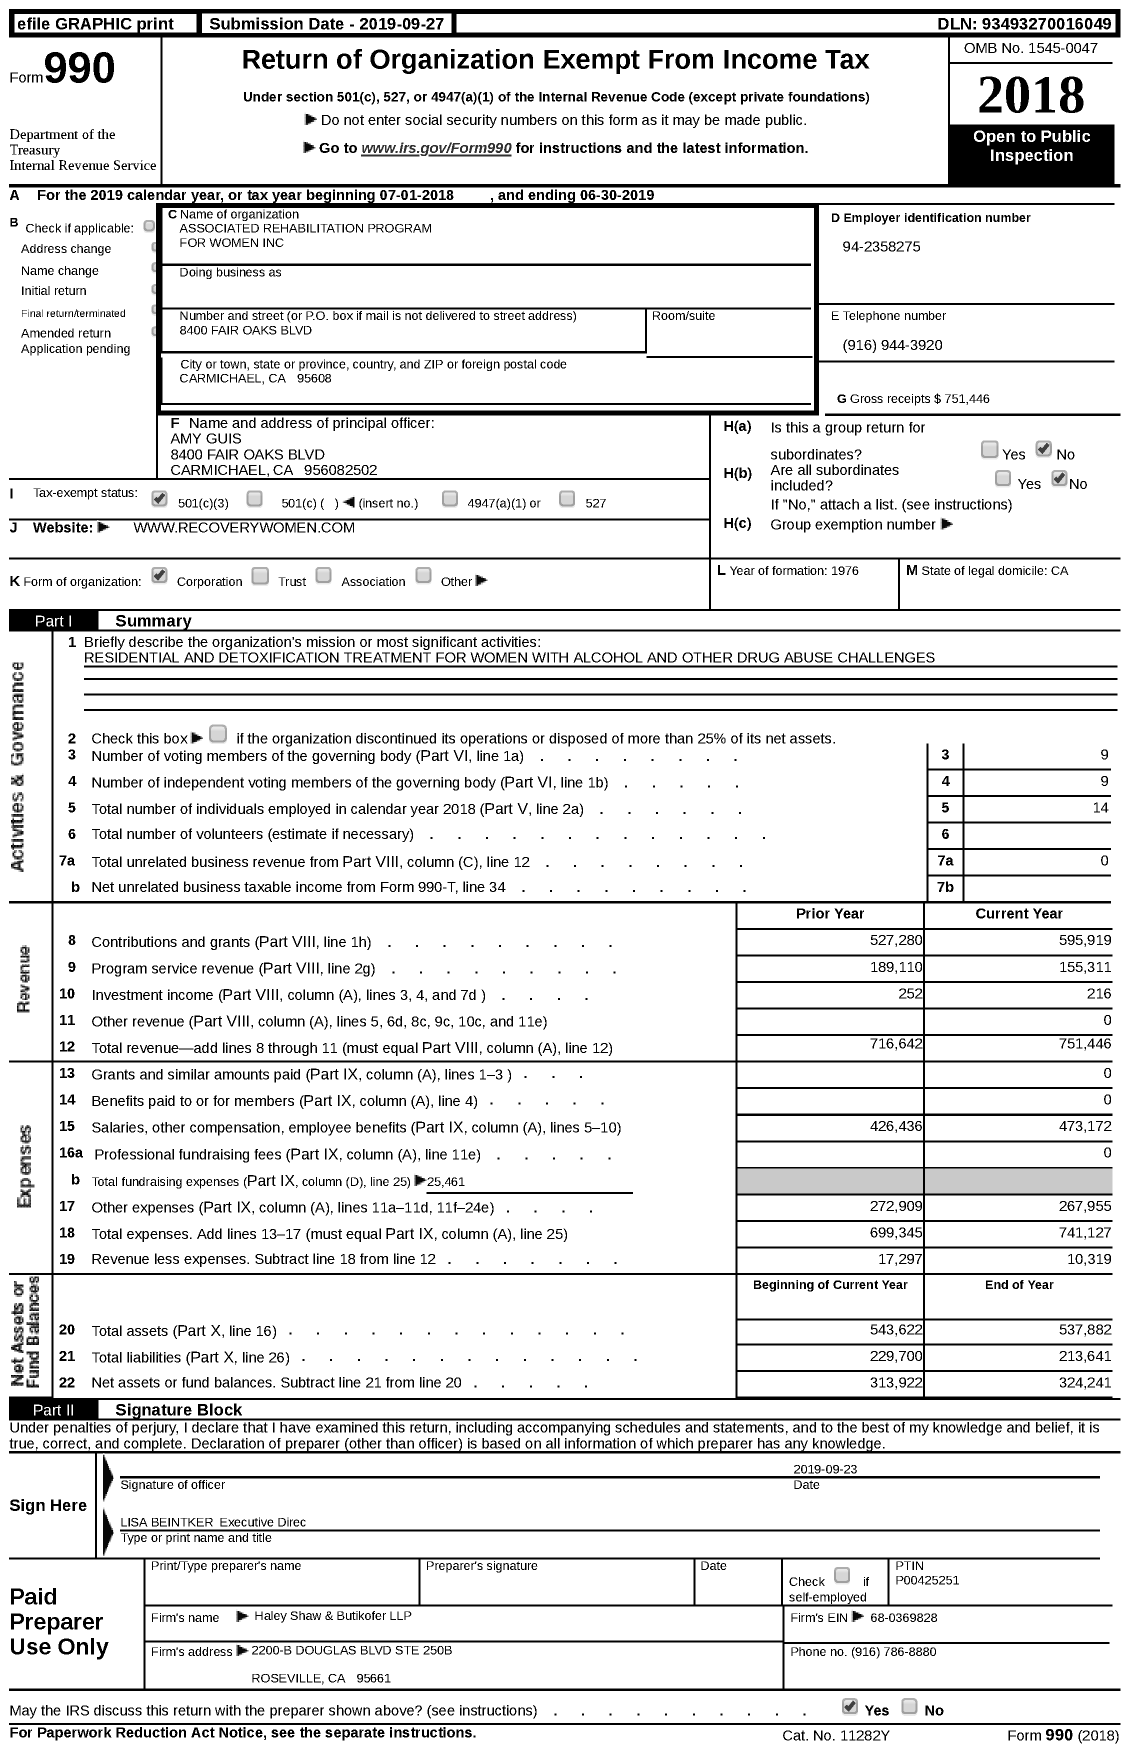 Image of first page of 2018 Form 990 for Associated Rehabilitation Program for Women